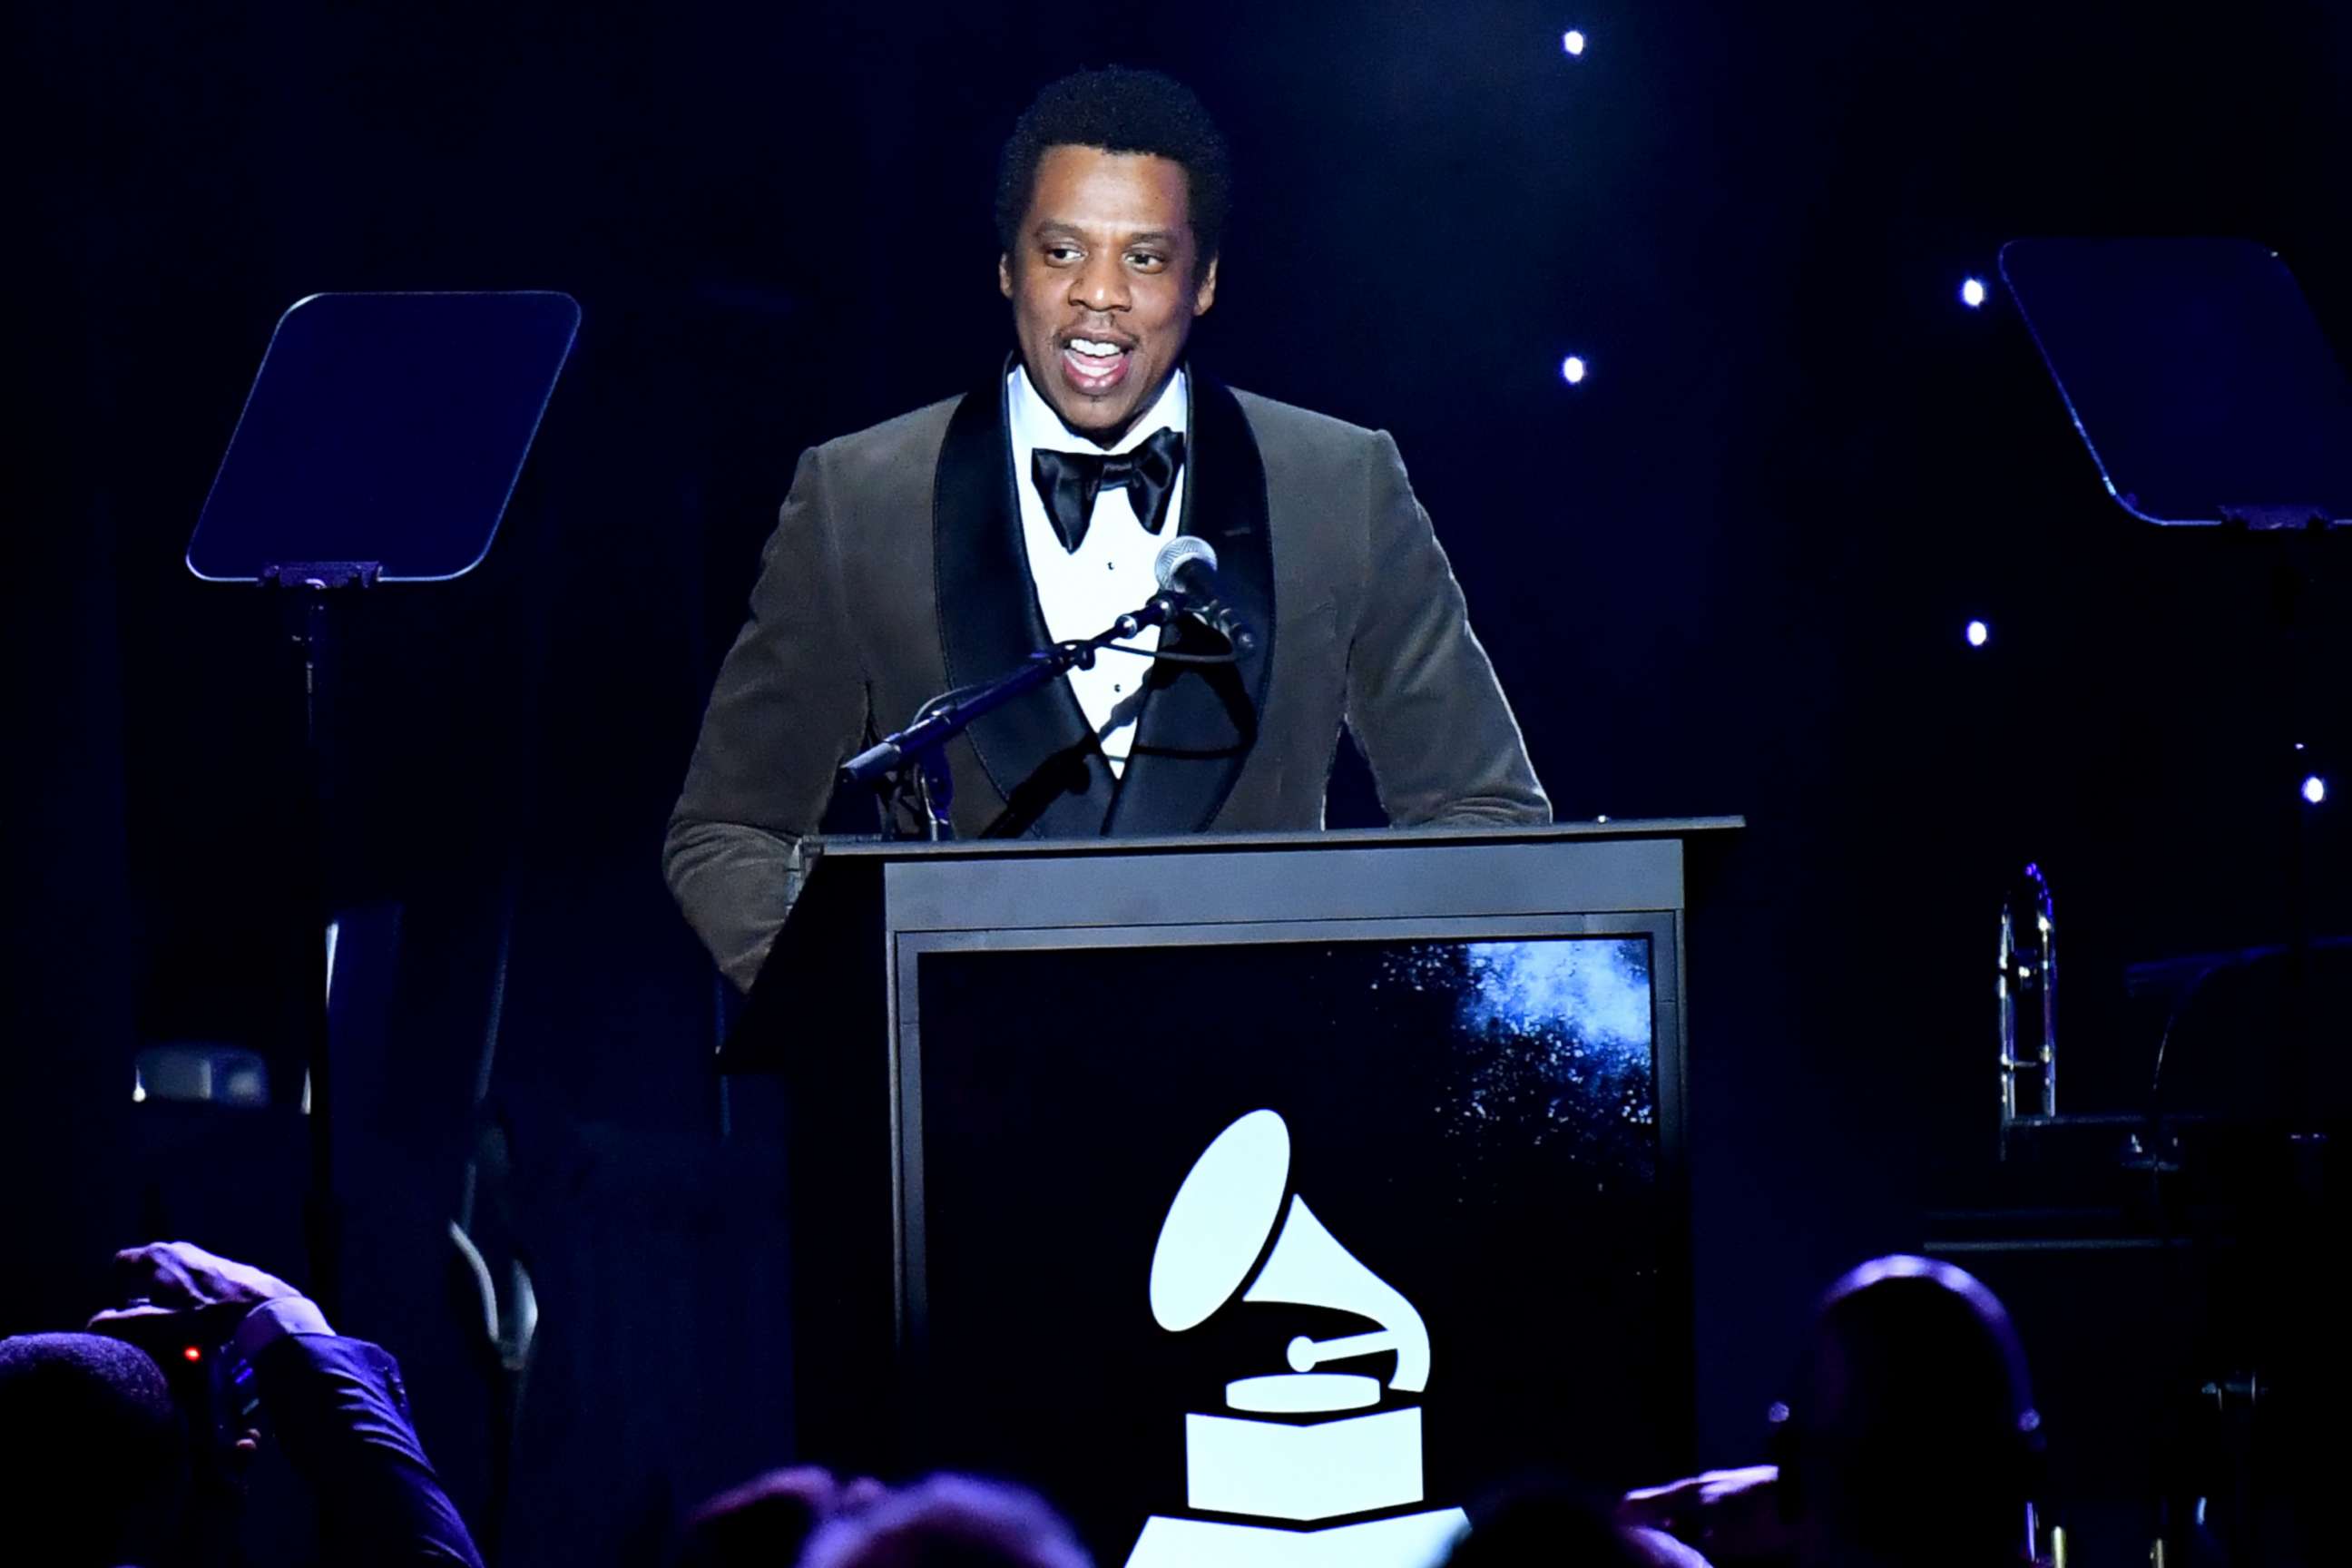 PHOTO: Honoree Jay-Z accepts the President's Merit Award onstage during the Clive Davis and Recording Academy Pre-GRAMMY Gala and GRAMMY Salute to Industry Icons Honoring Jay-Z, Jan. 27, 2018 in New York City.